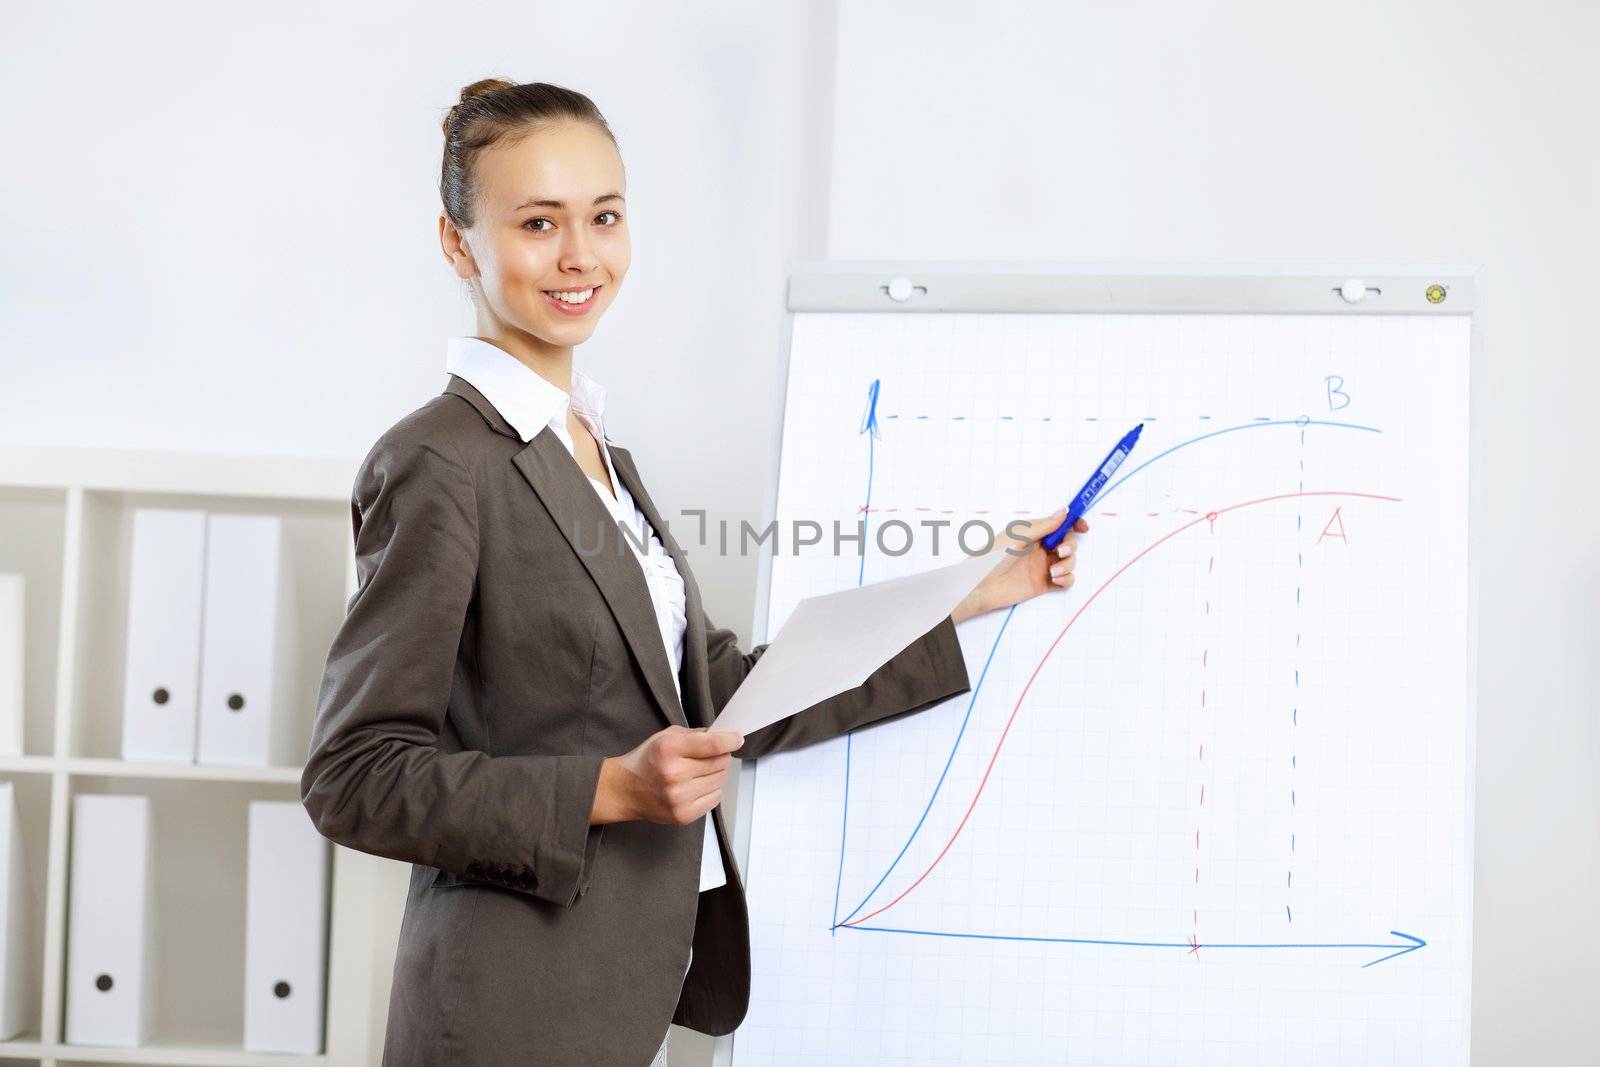 Portrait of young business woman in office